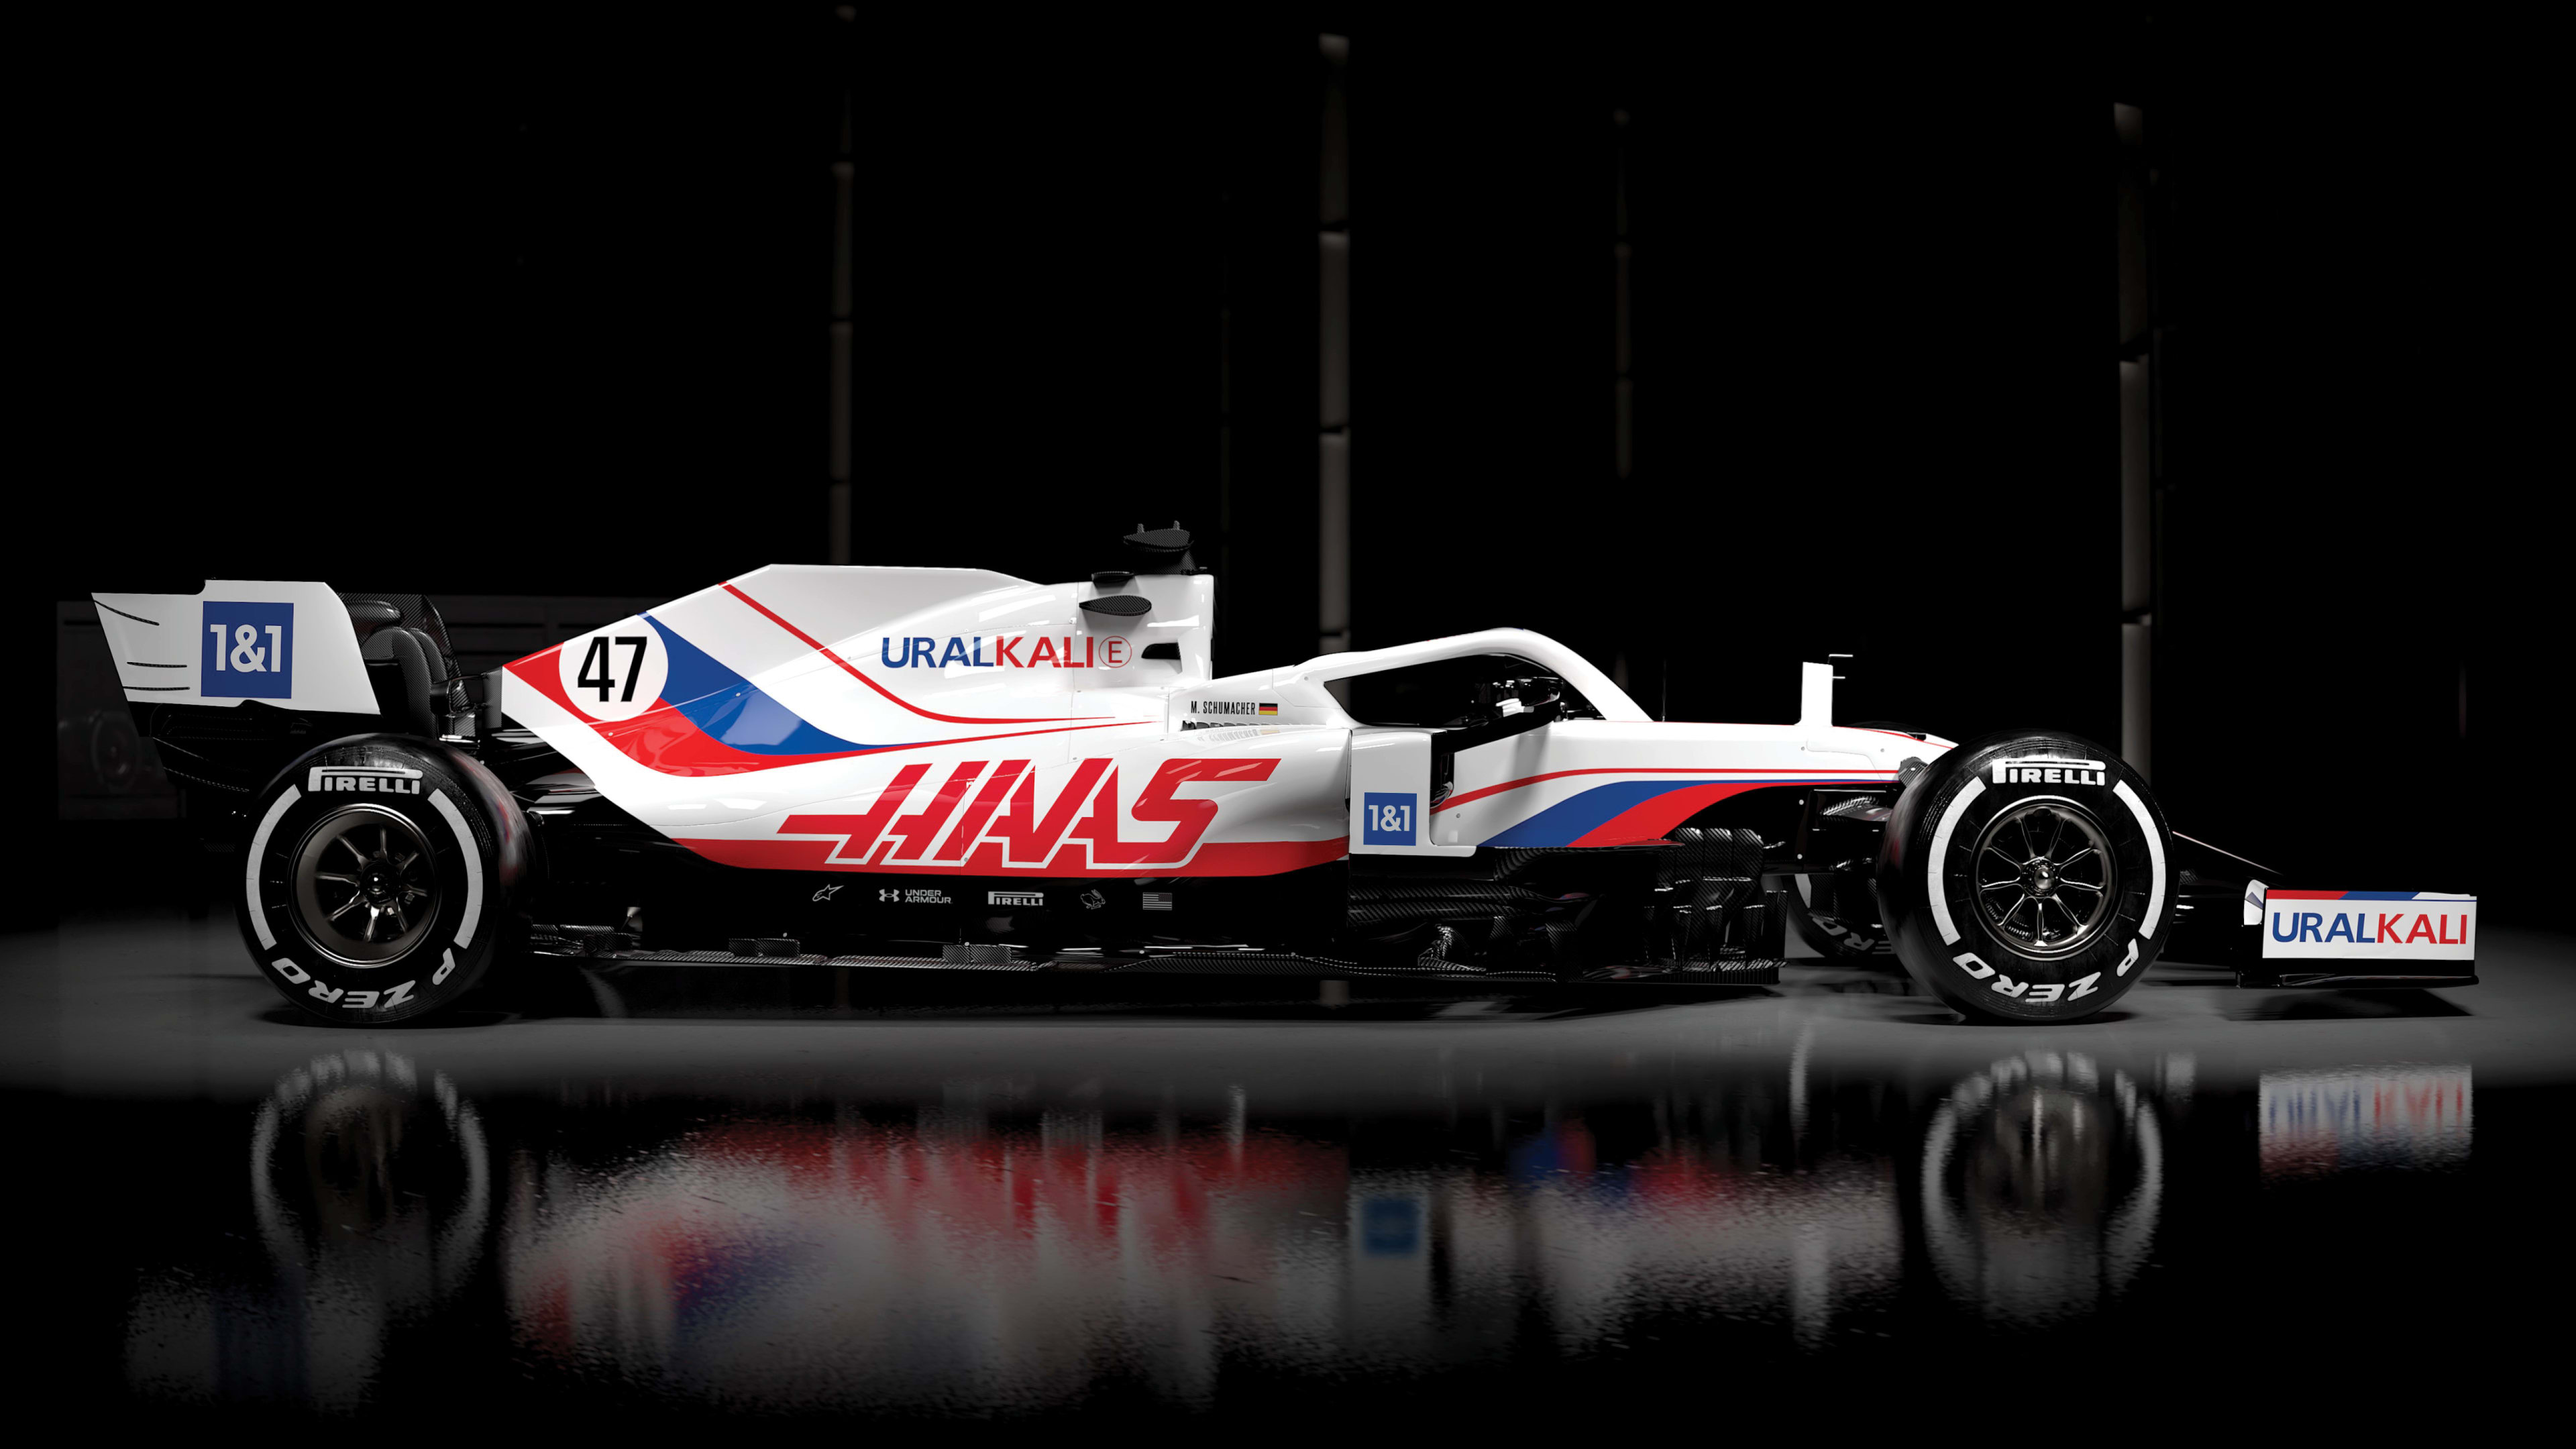 FIRST LOOK Haas reveal fresh new livery for Schumacher and Mazepin’s